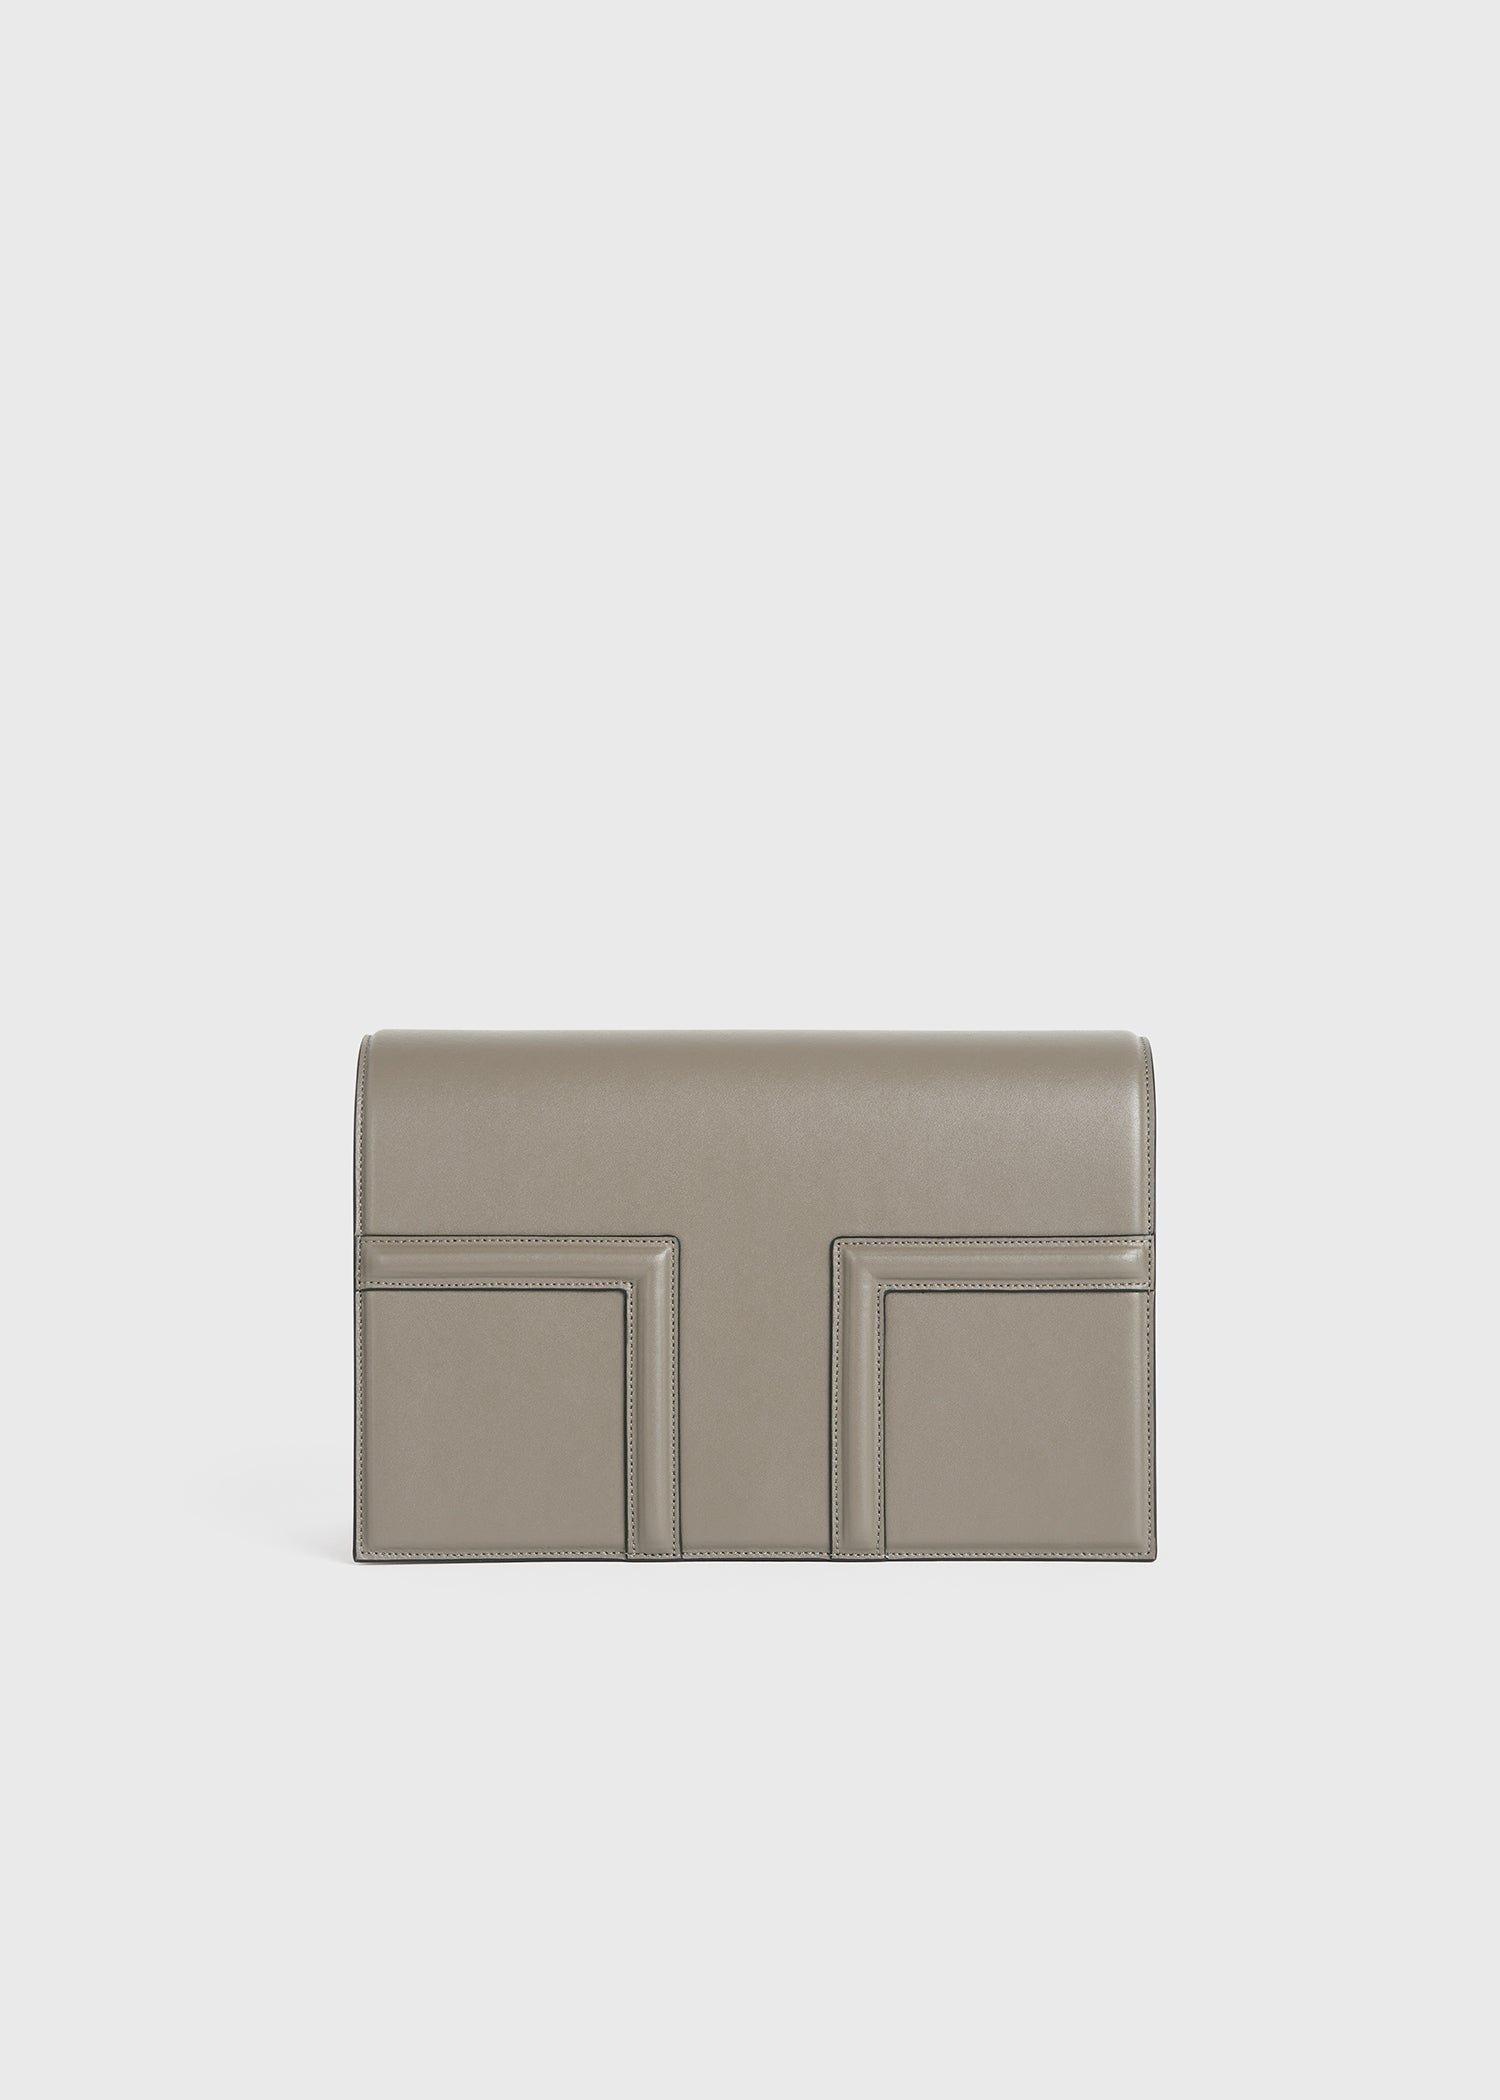 T-Flap bag taupe - 1